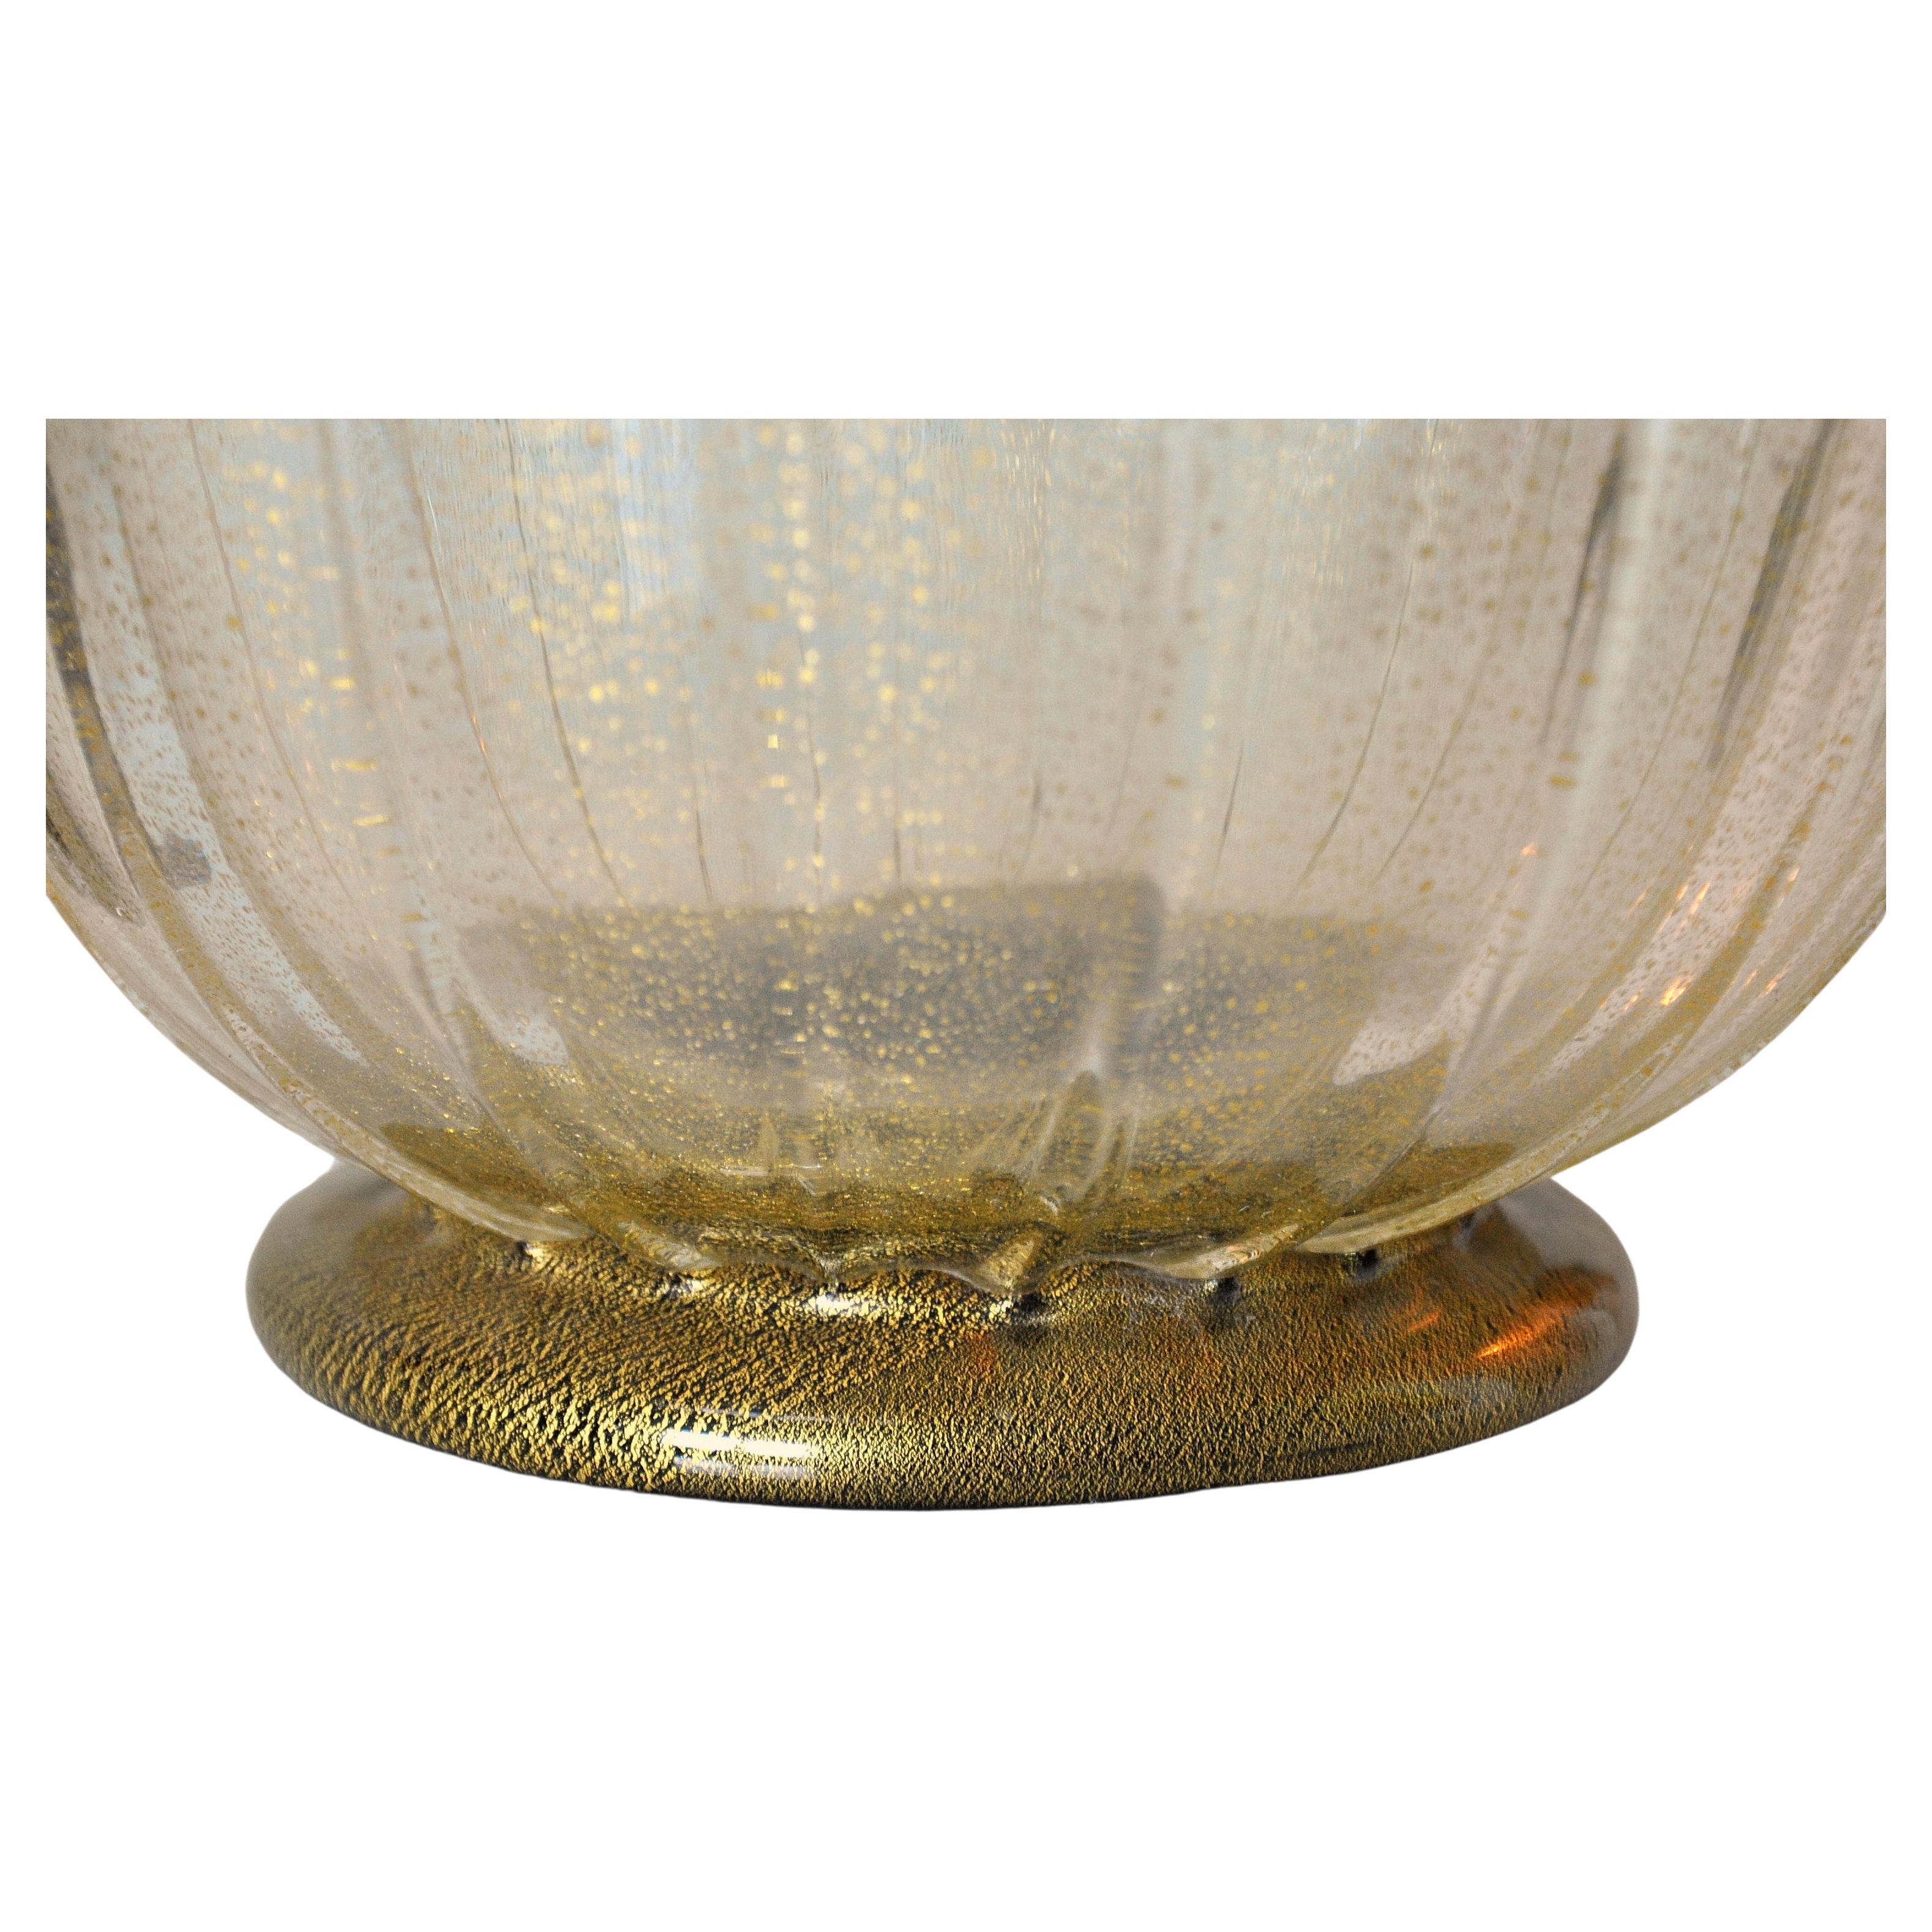 Art Deco Gold and Black Murano Glass Centerpiece Bowl with Serpent Handles For Sale 3